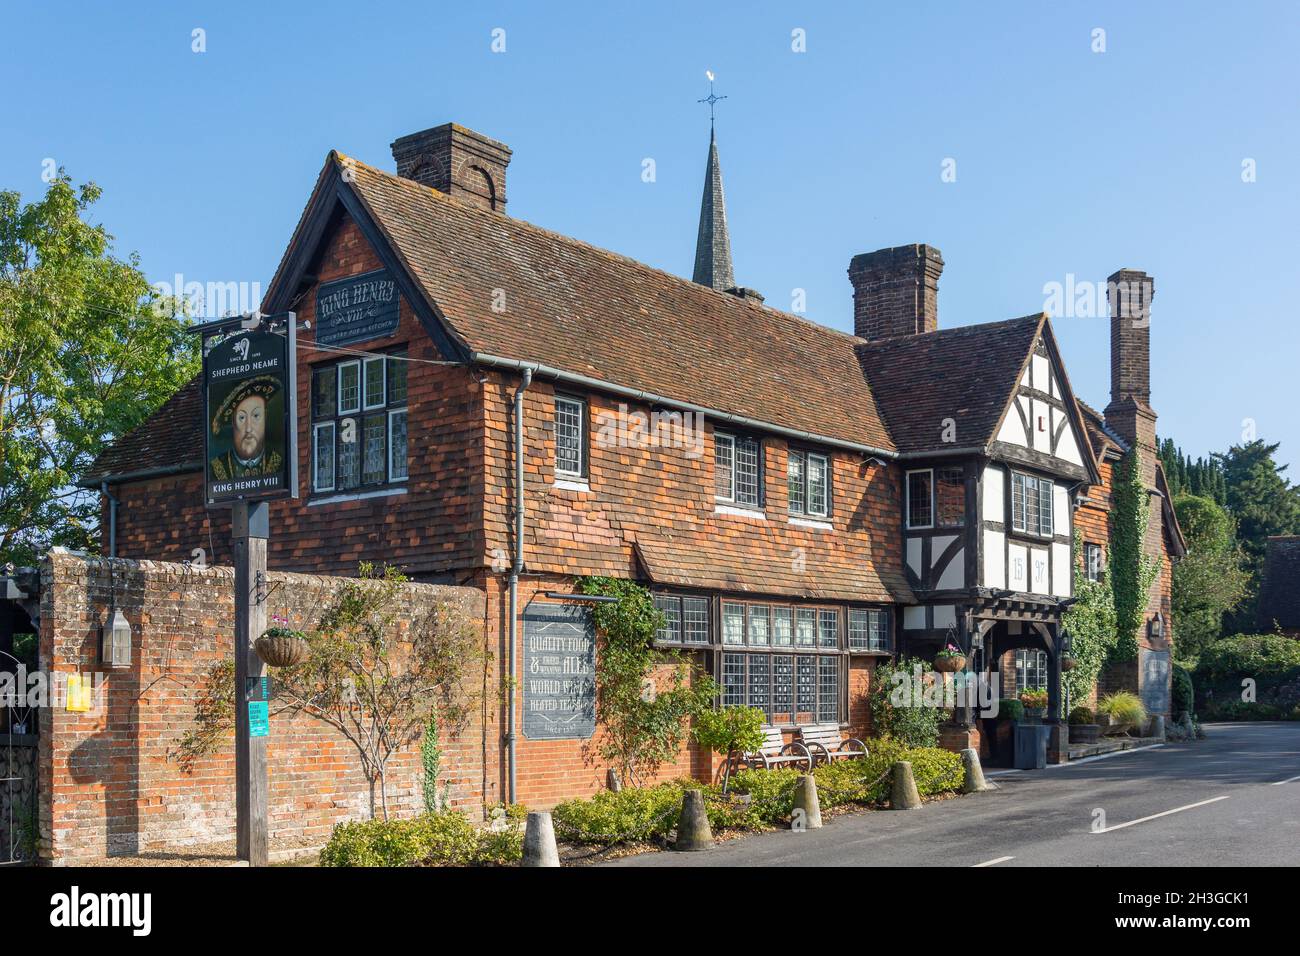 King Henry VIII Country pub & kitchen, Hever Road, Hever, Kent, Inghilterra, Regno Unito Foto Stock